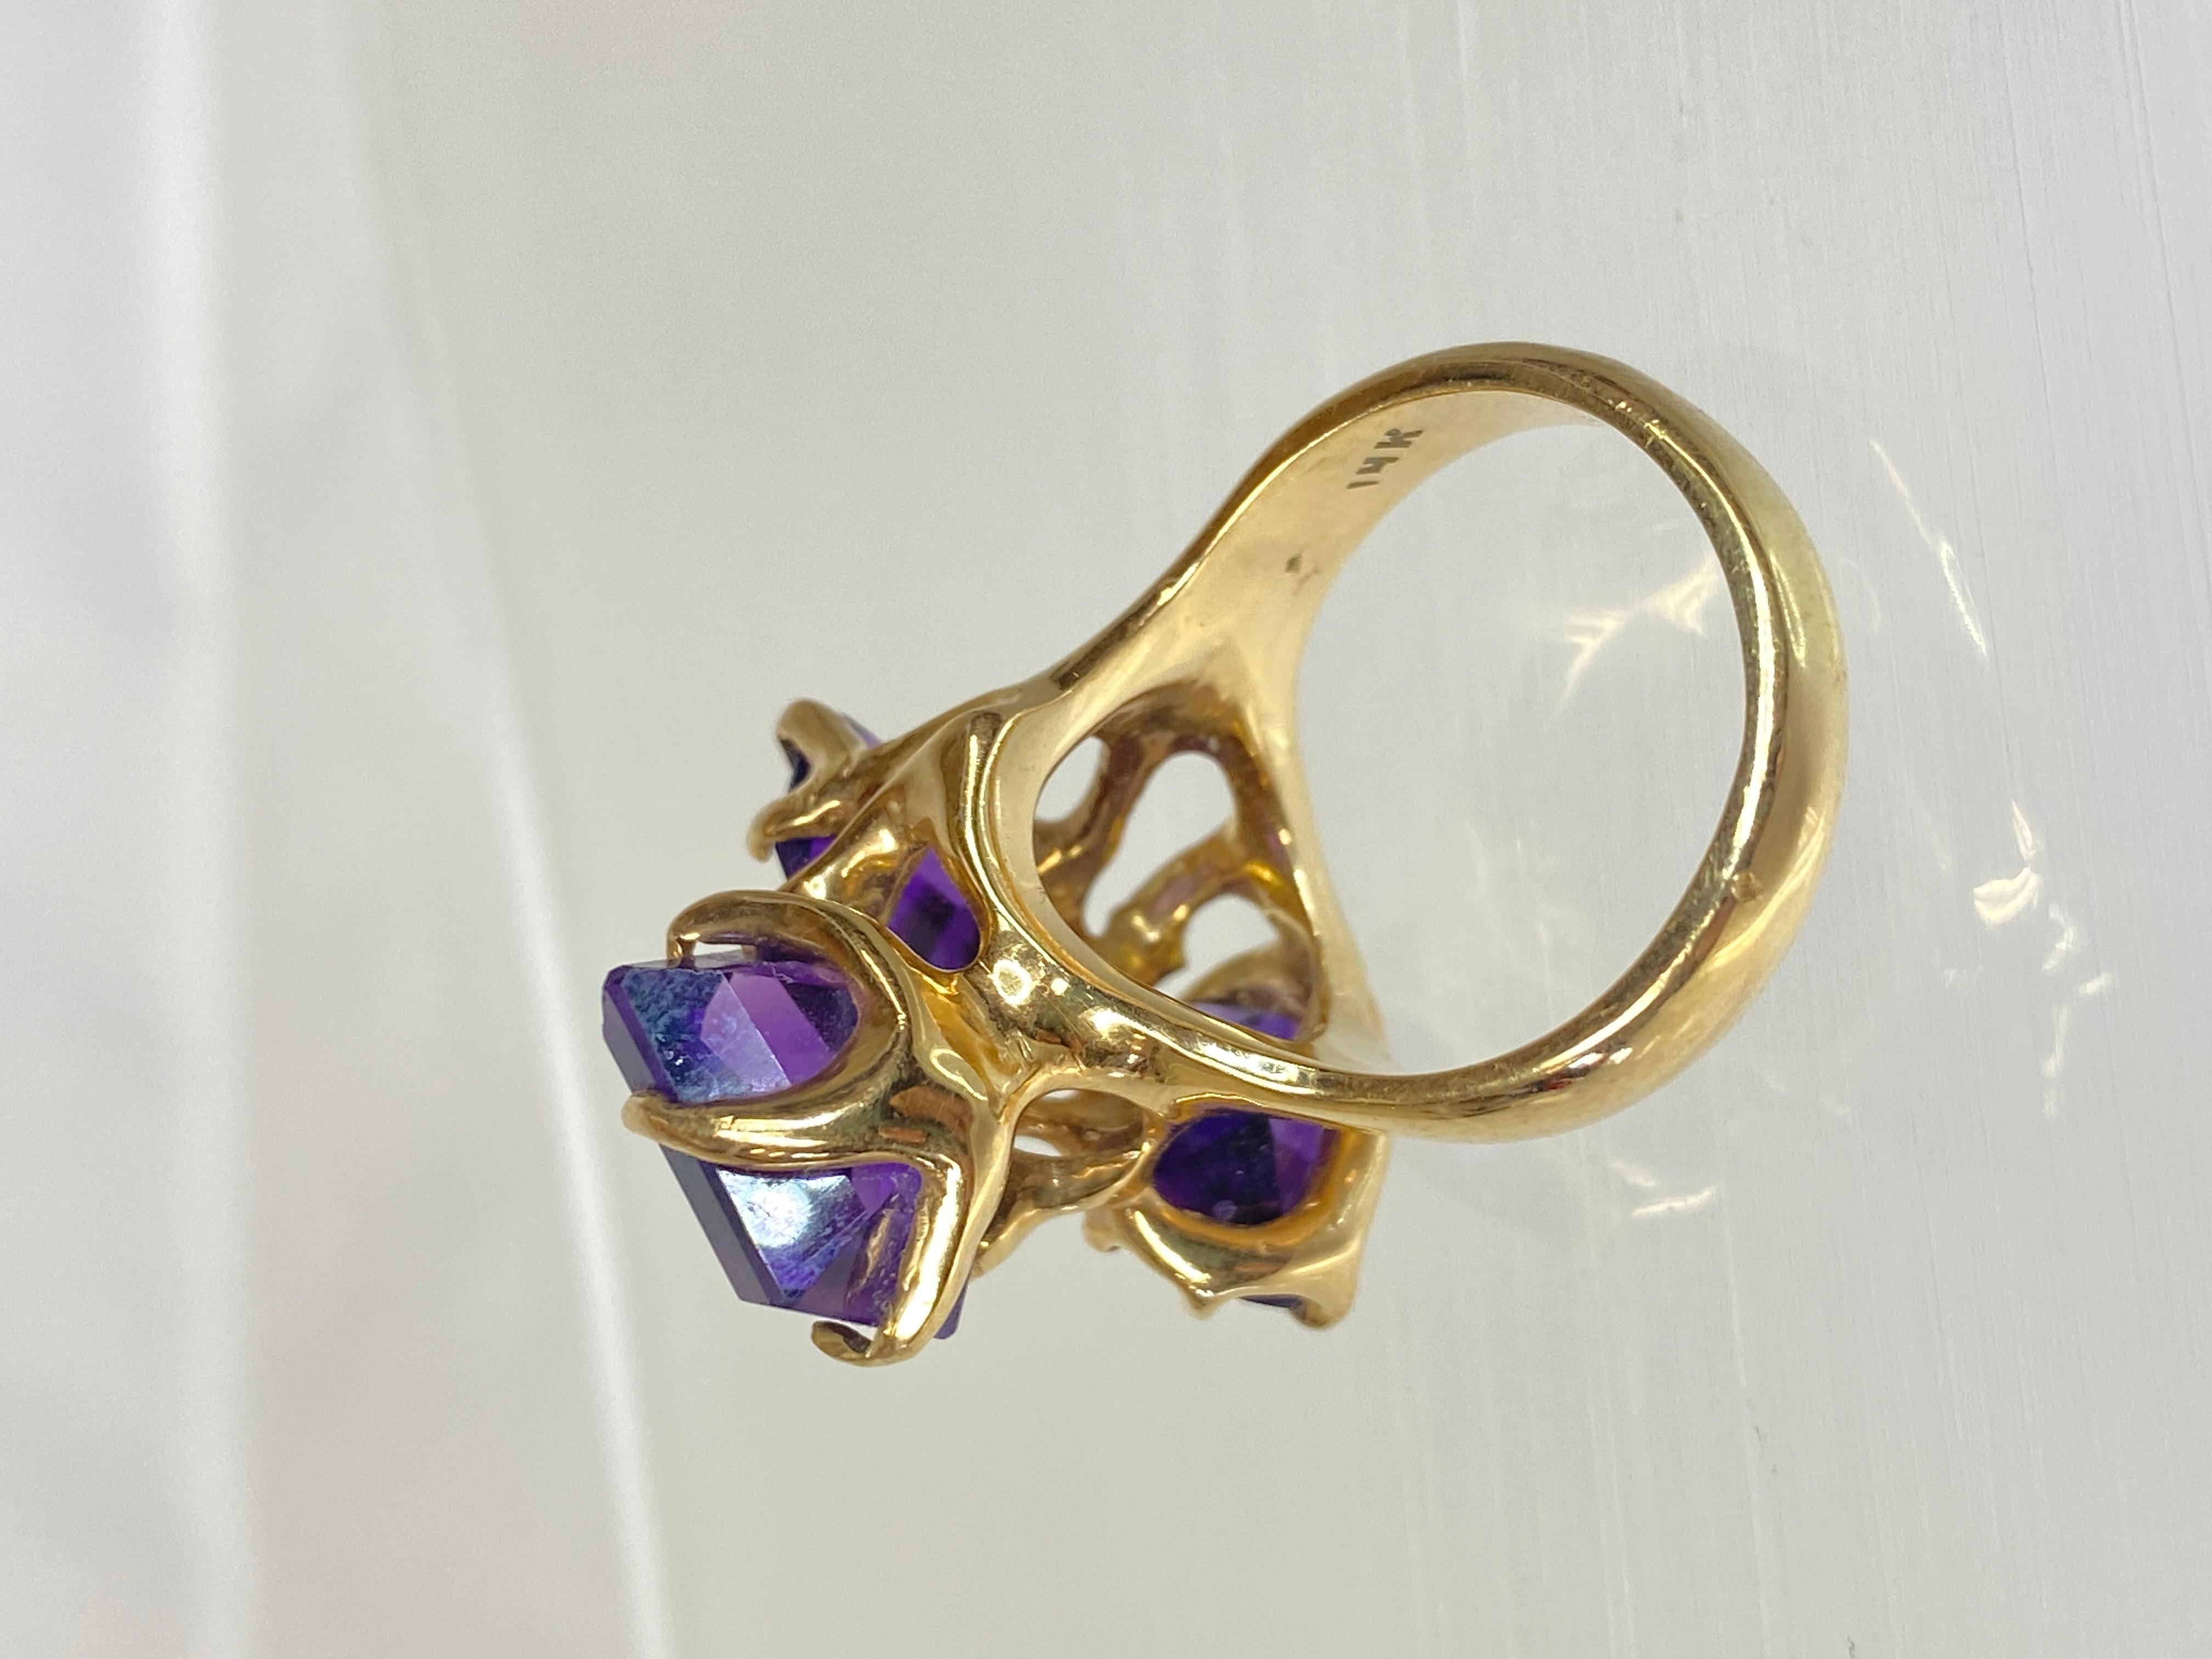 14K Yellow Gold Asymmetrical 3 Stone Amethyst Gemstone Ring Size 8.75 In Good Condition For Sale In San Jacinto, CA